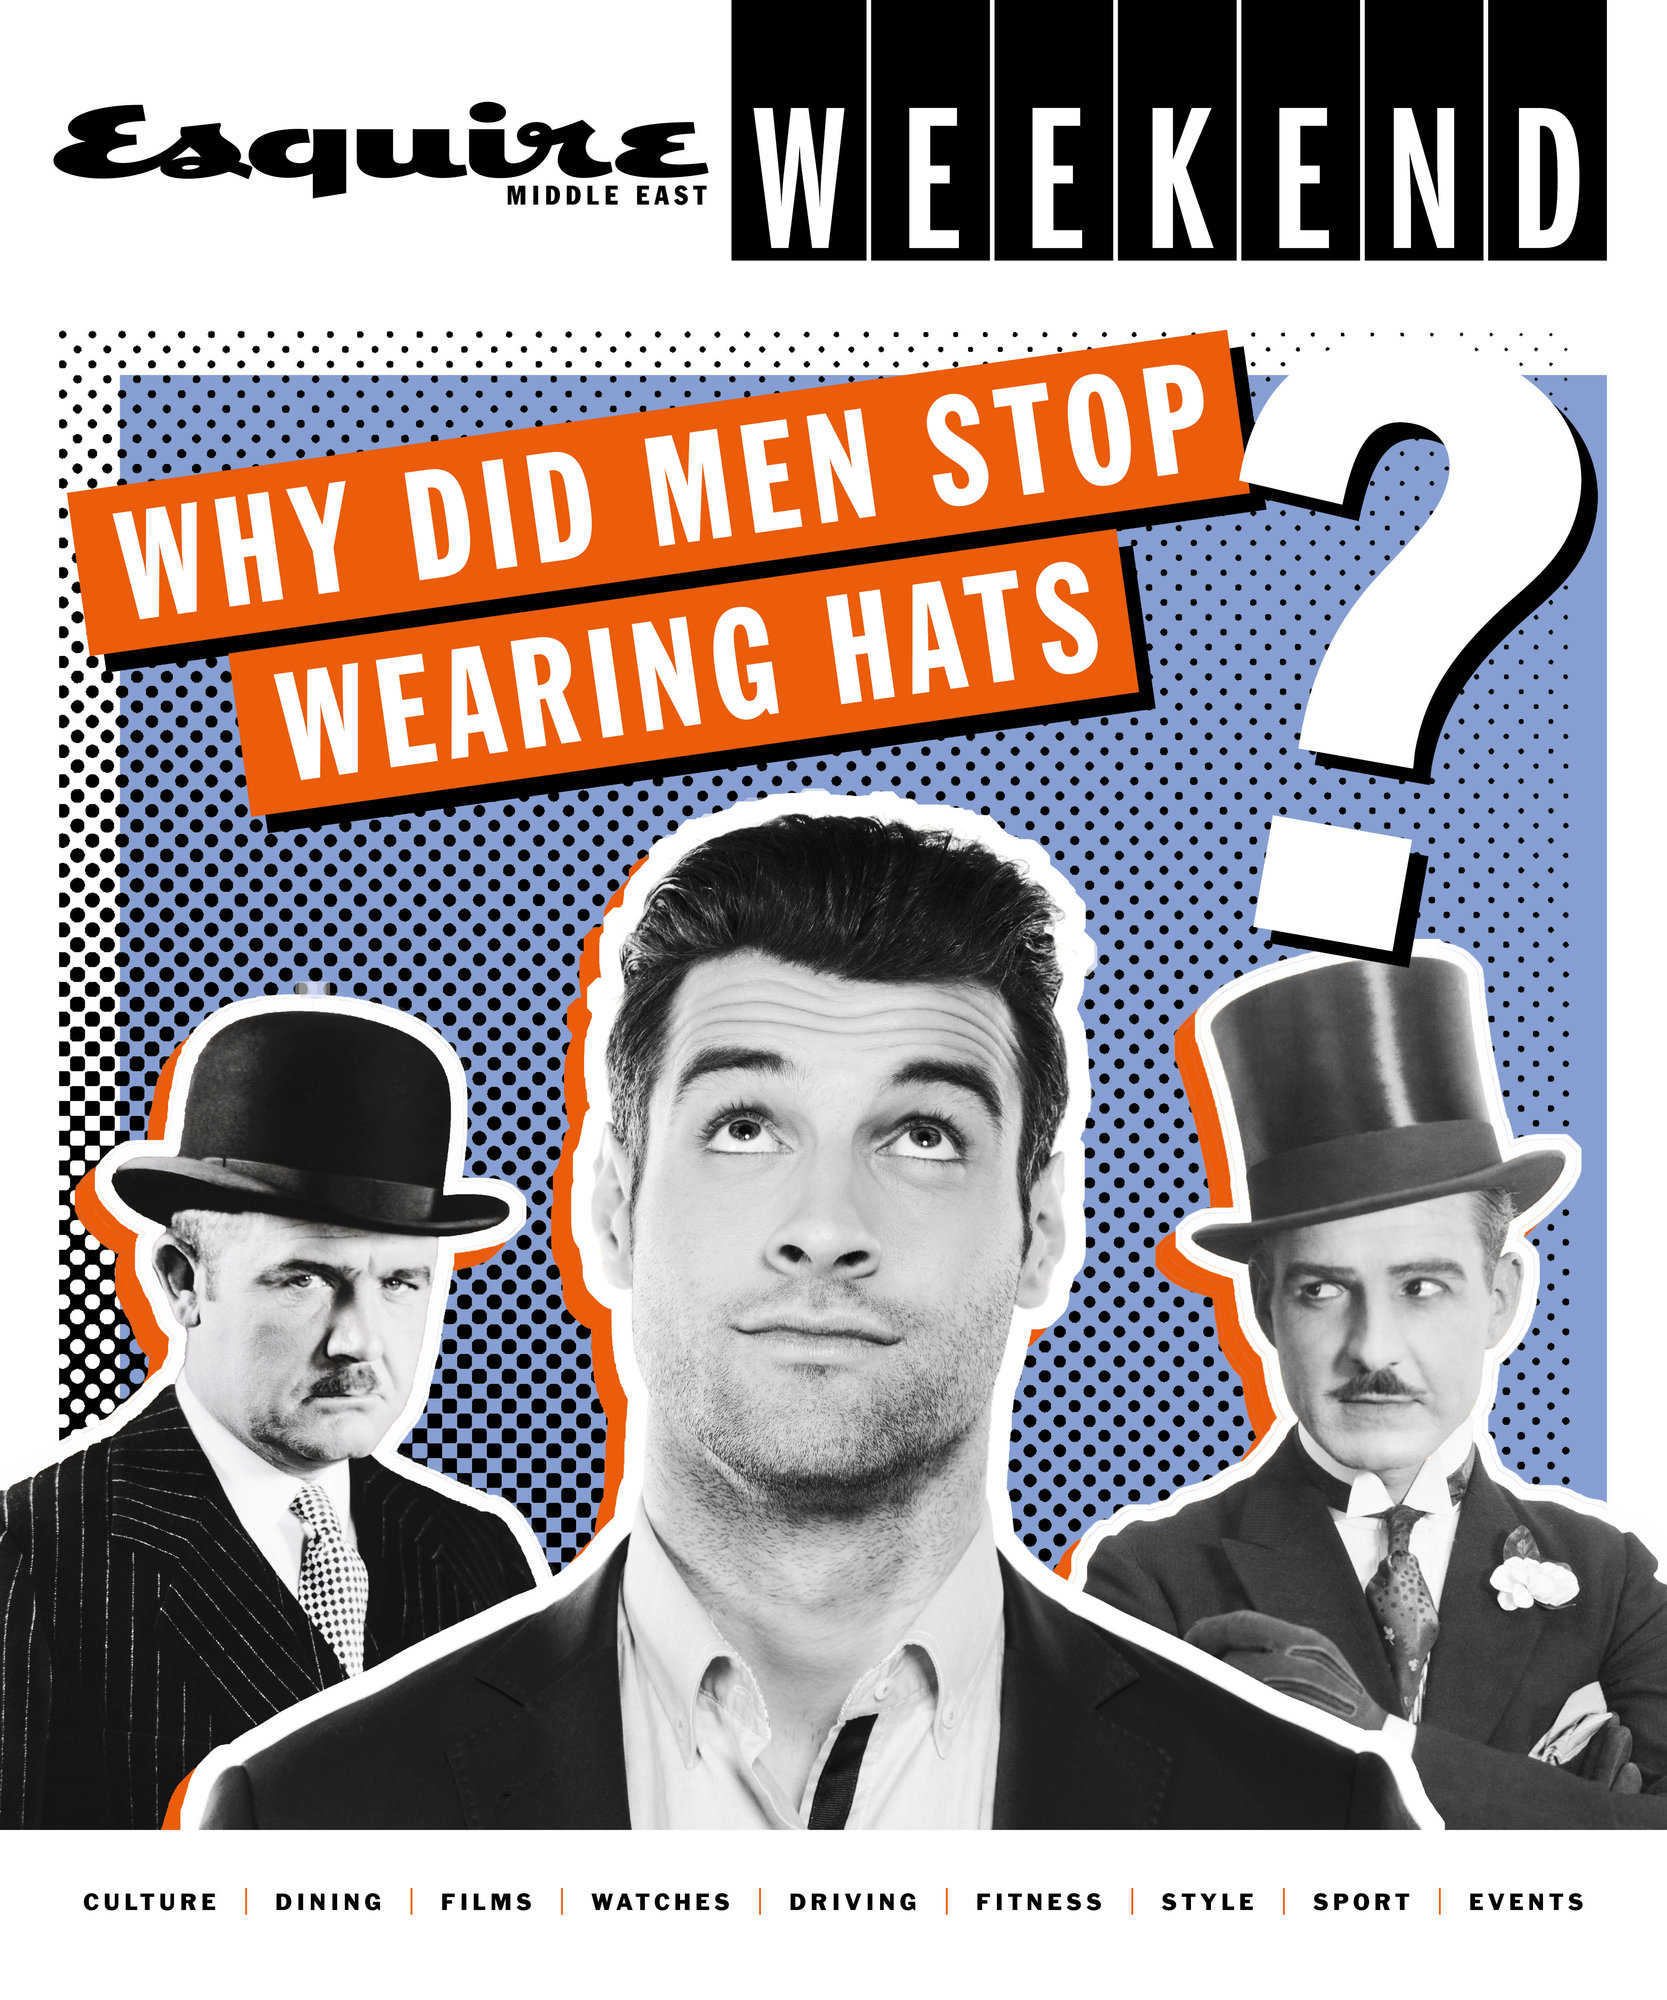 Why Did Men Stop Wearing Hats Esquire Middle East